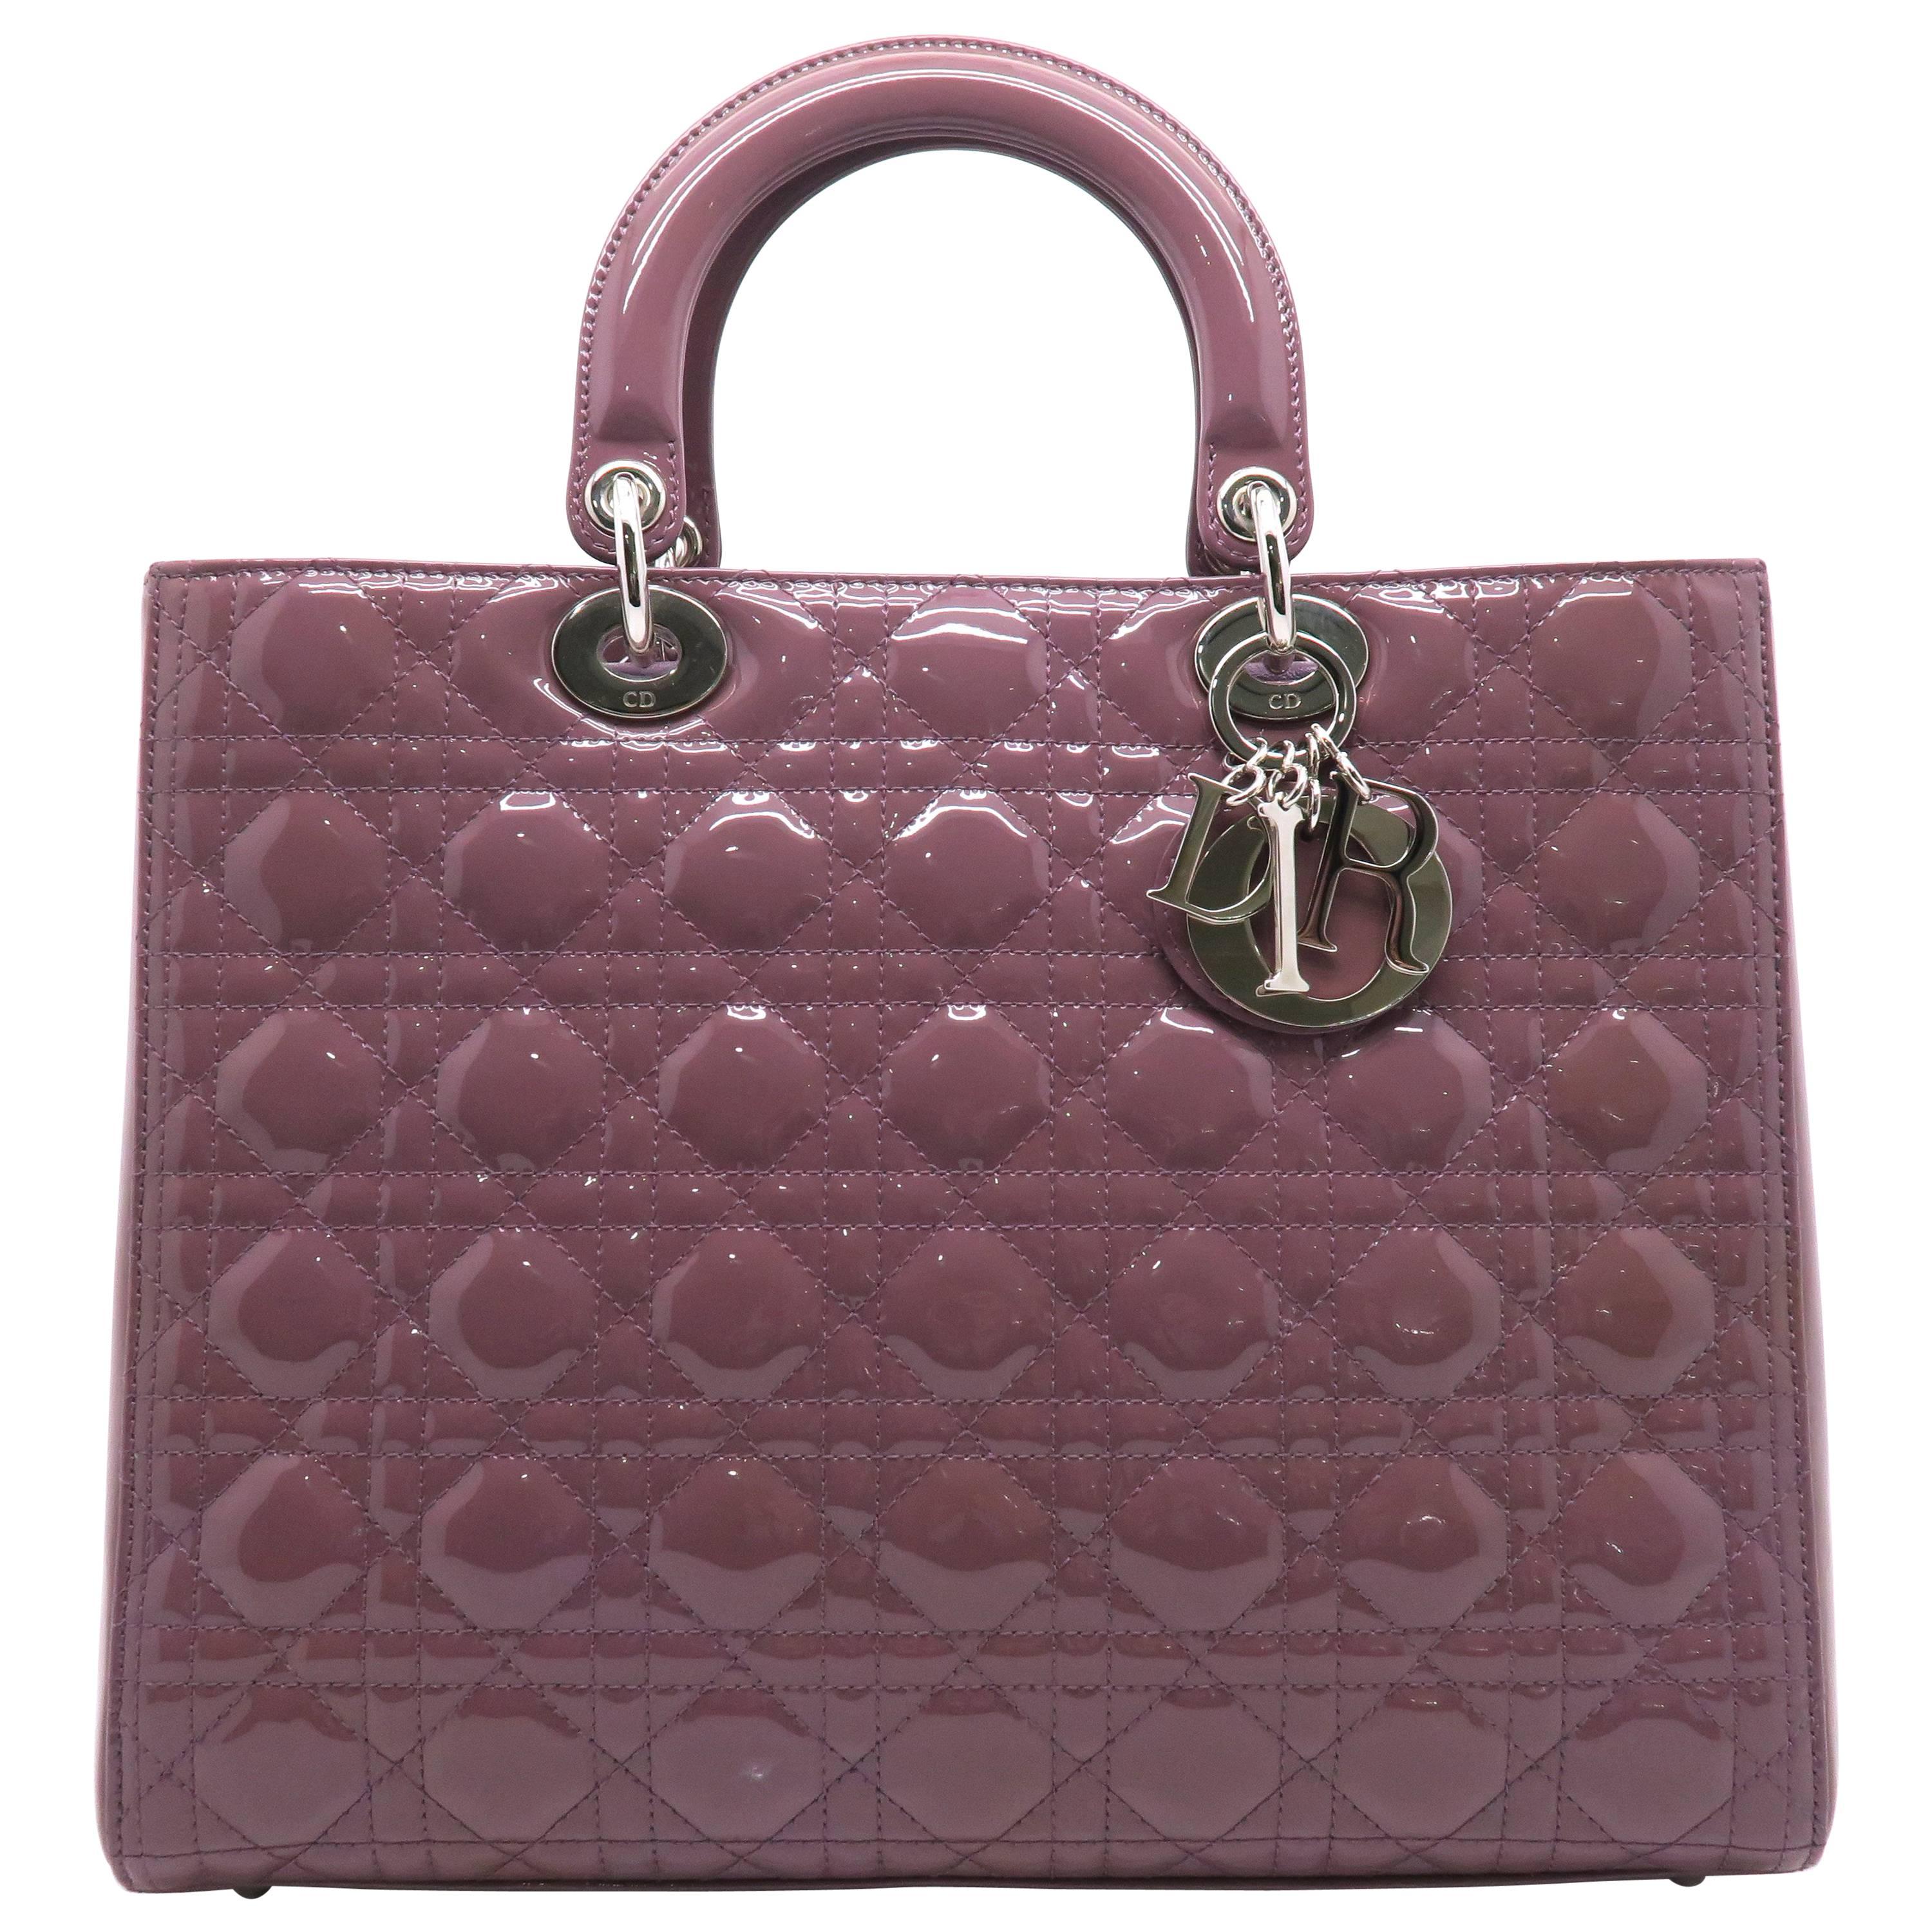 Christian Dior Lady Dior Pale Purple Quilted Patent Leather Satchel